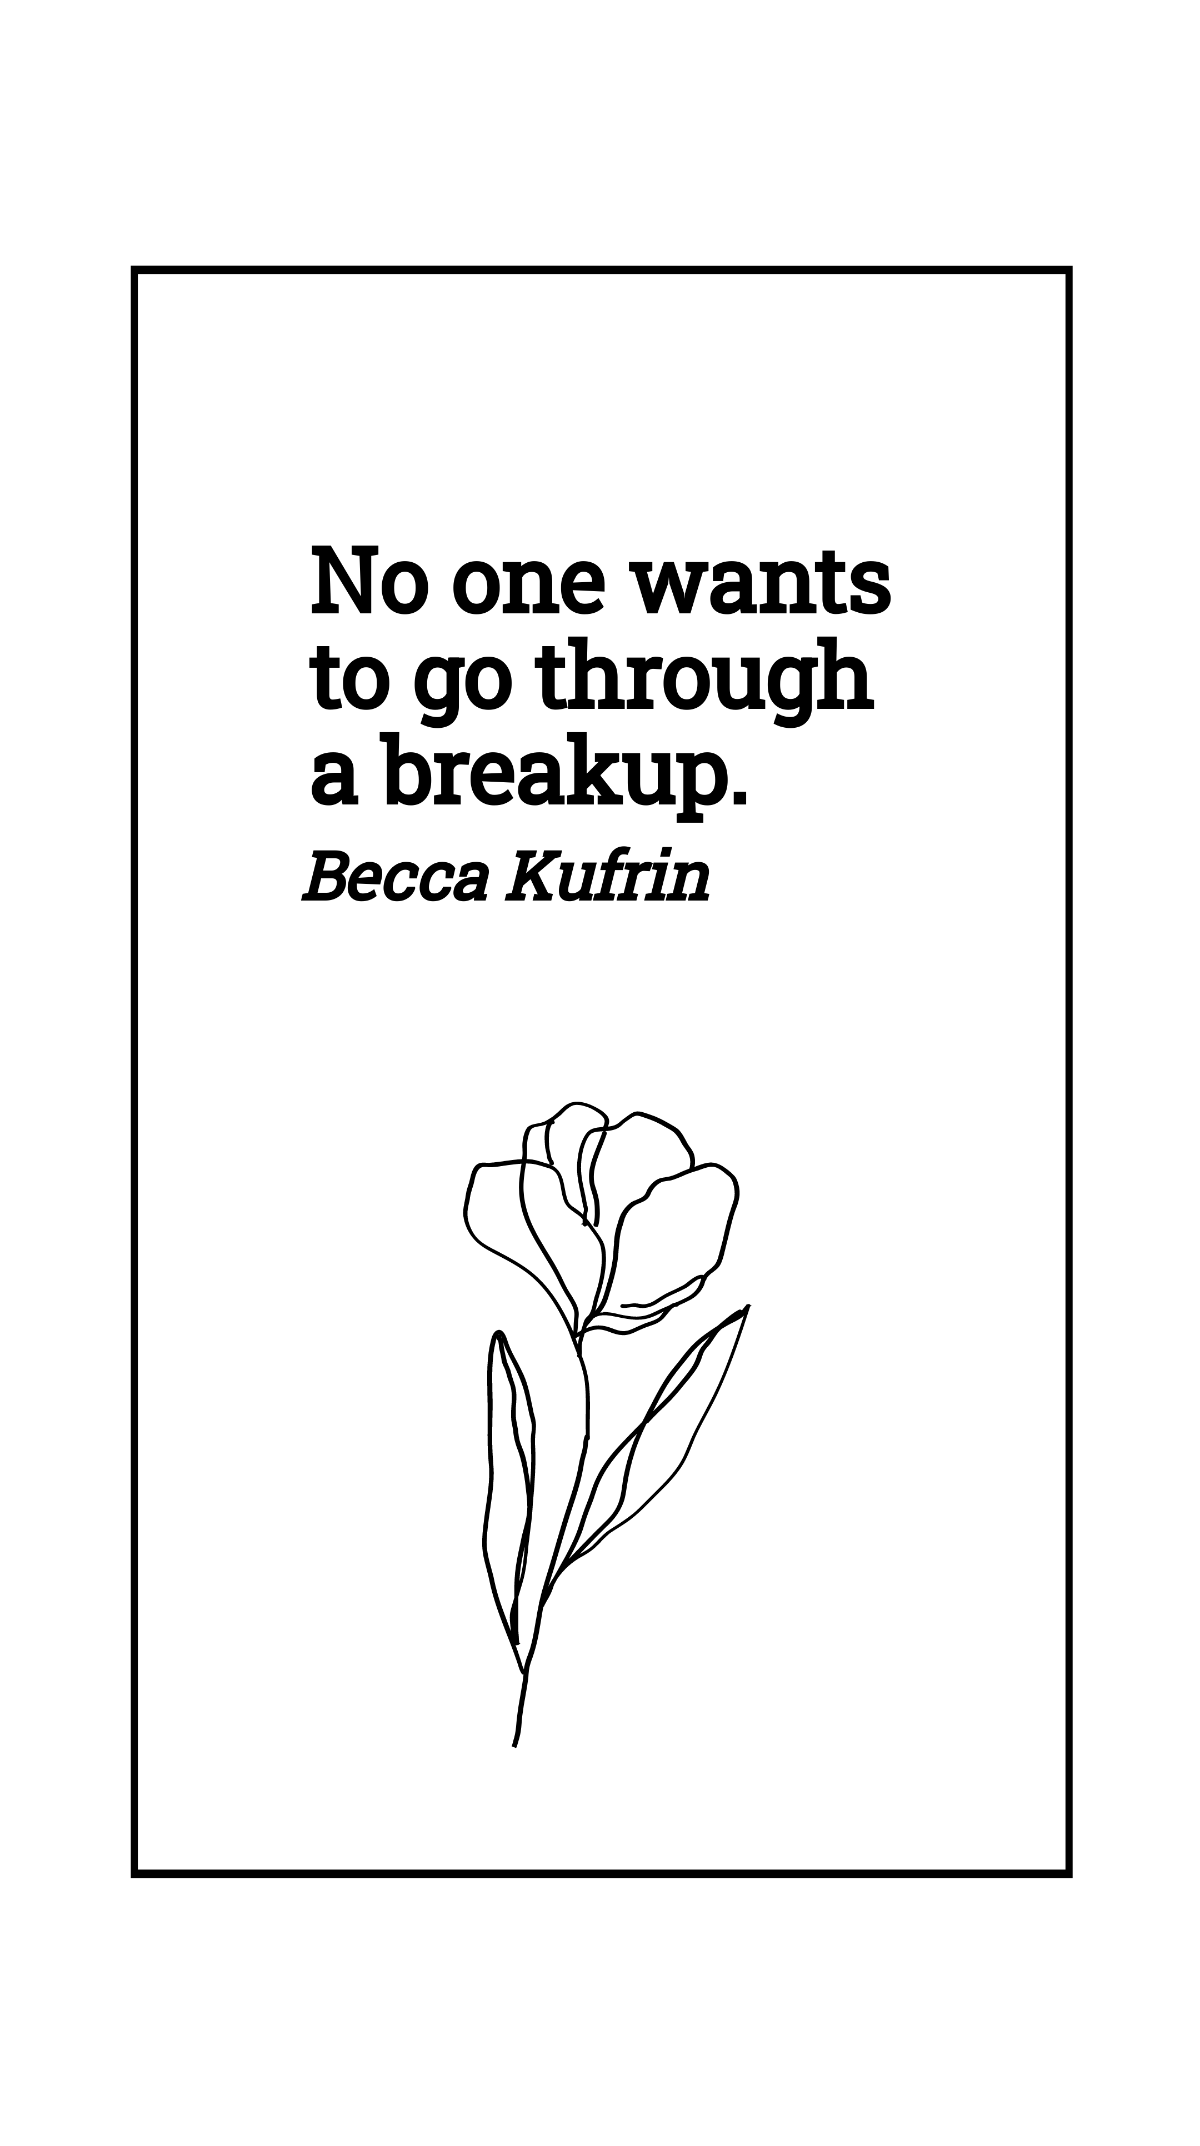 Becca Kufrin - No one wants to go through a breakup. Template